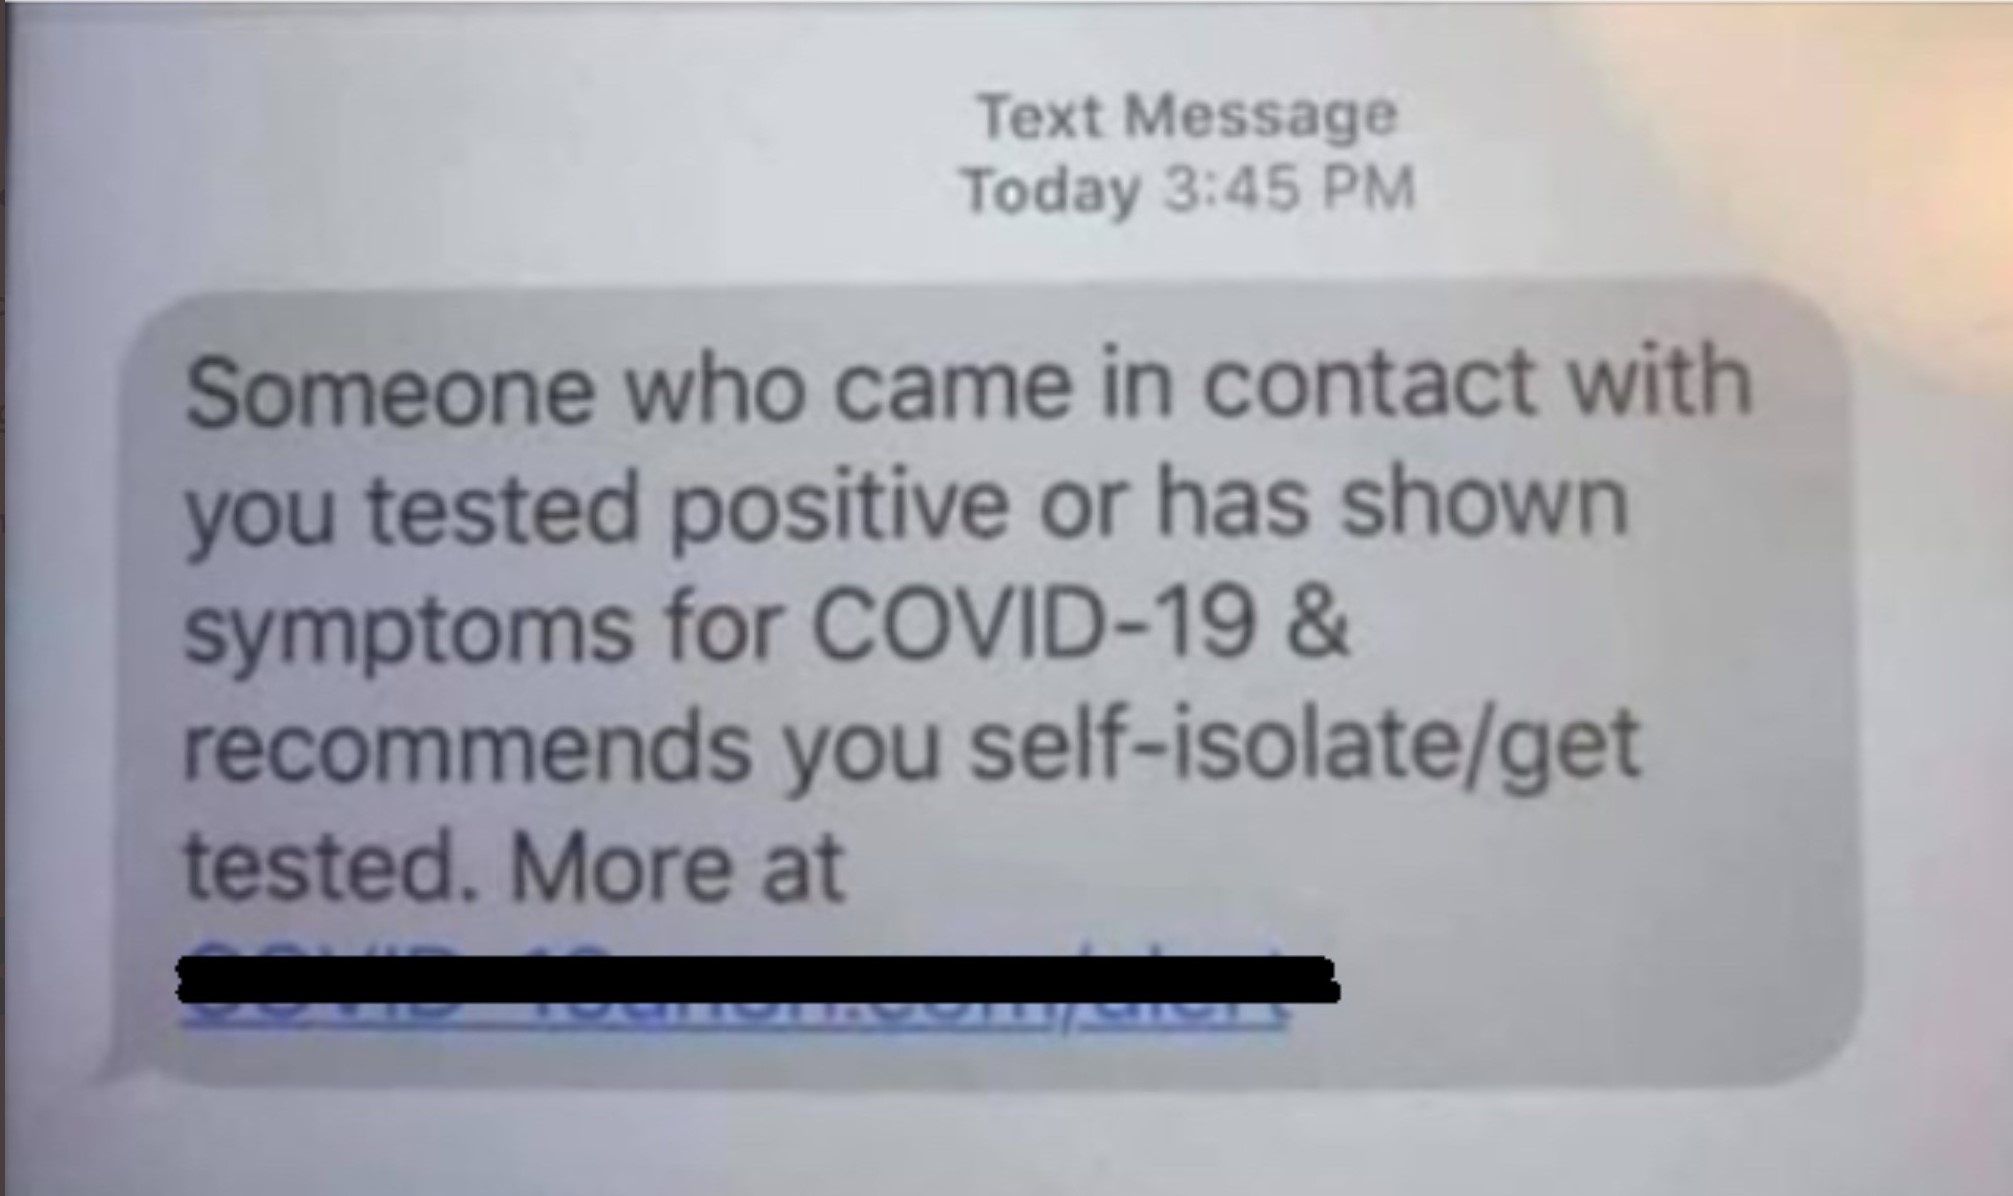 An example of a phishing scam reported by the Chartered Trading Standards Institute. This is not an official text, and the link should not be trusted.